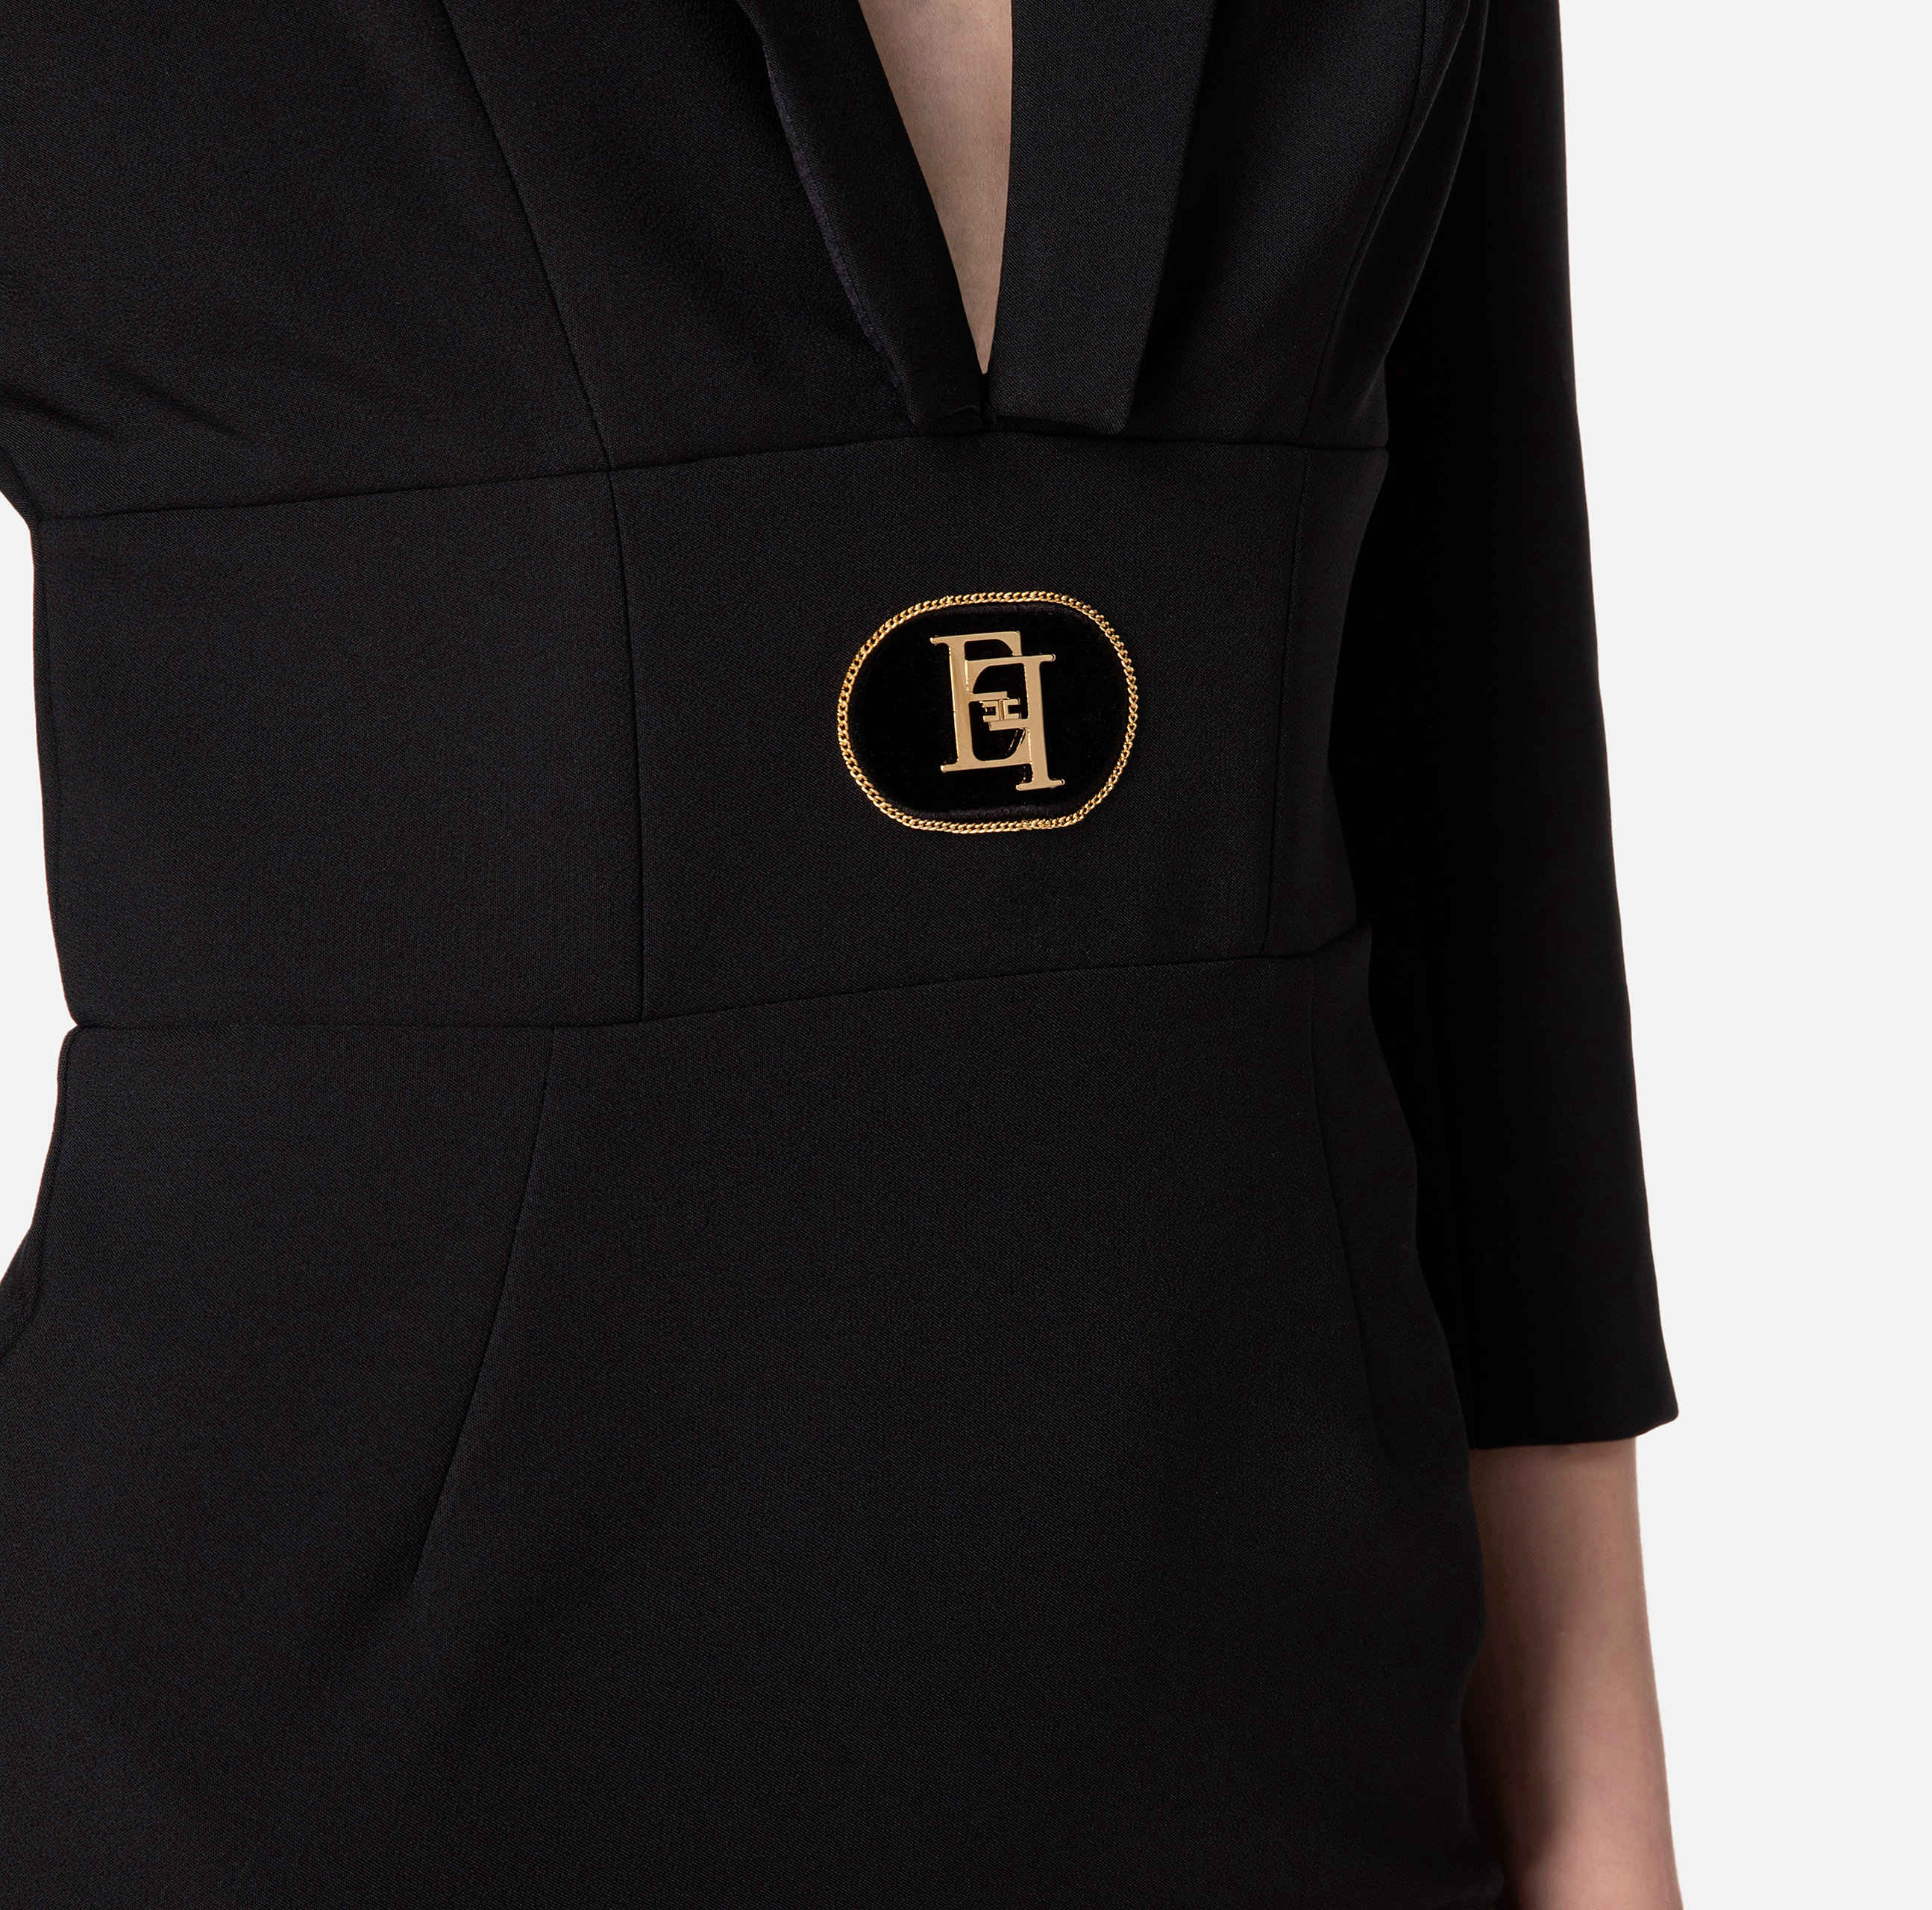 Mini-dress in double layer crêpe fabric with lapels - Elisabetta Franchi